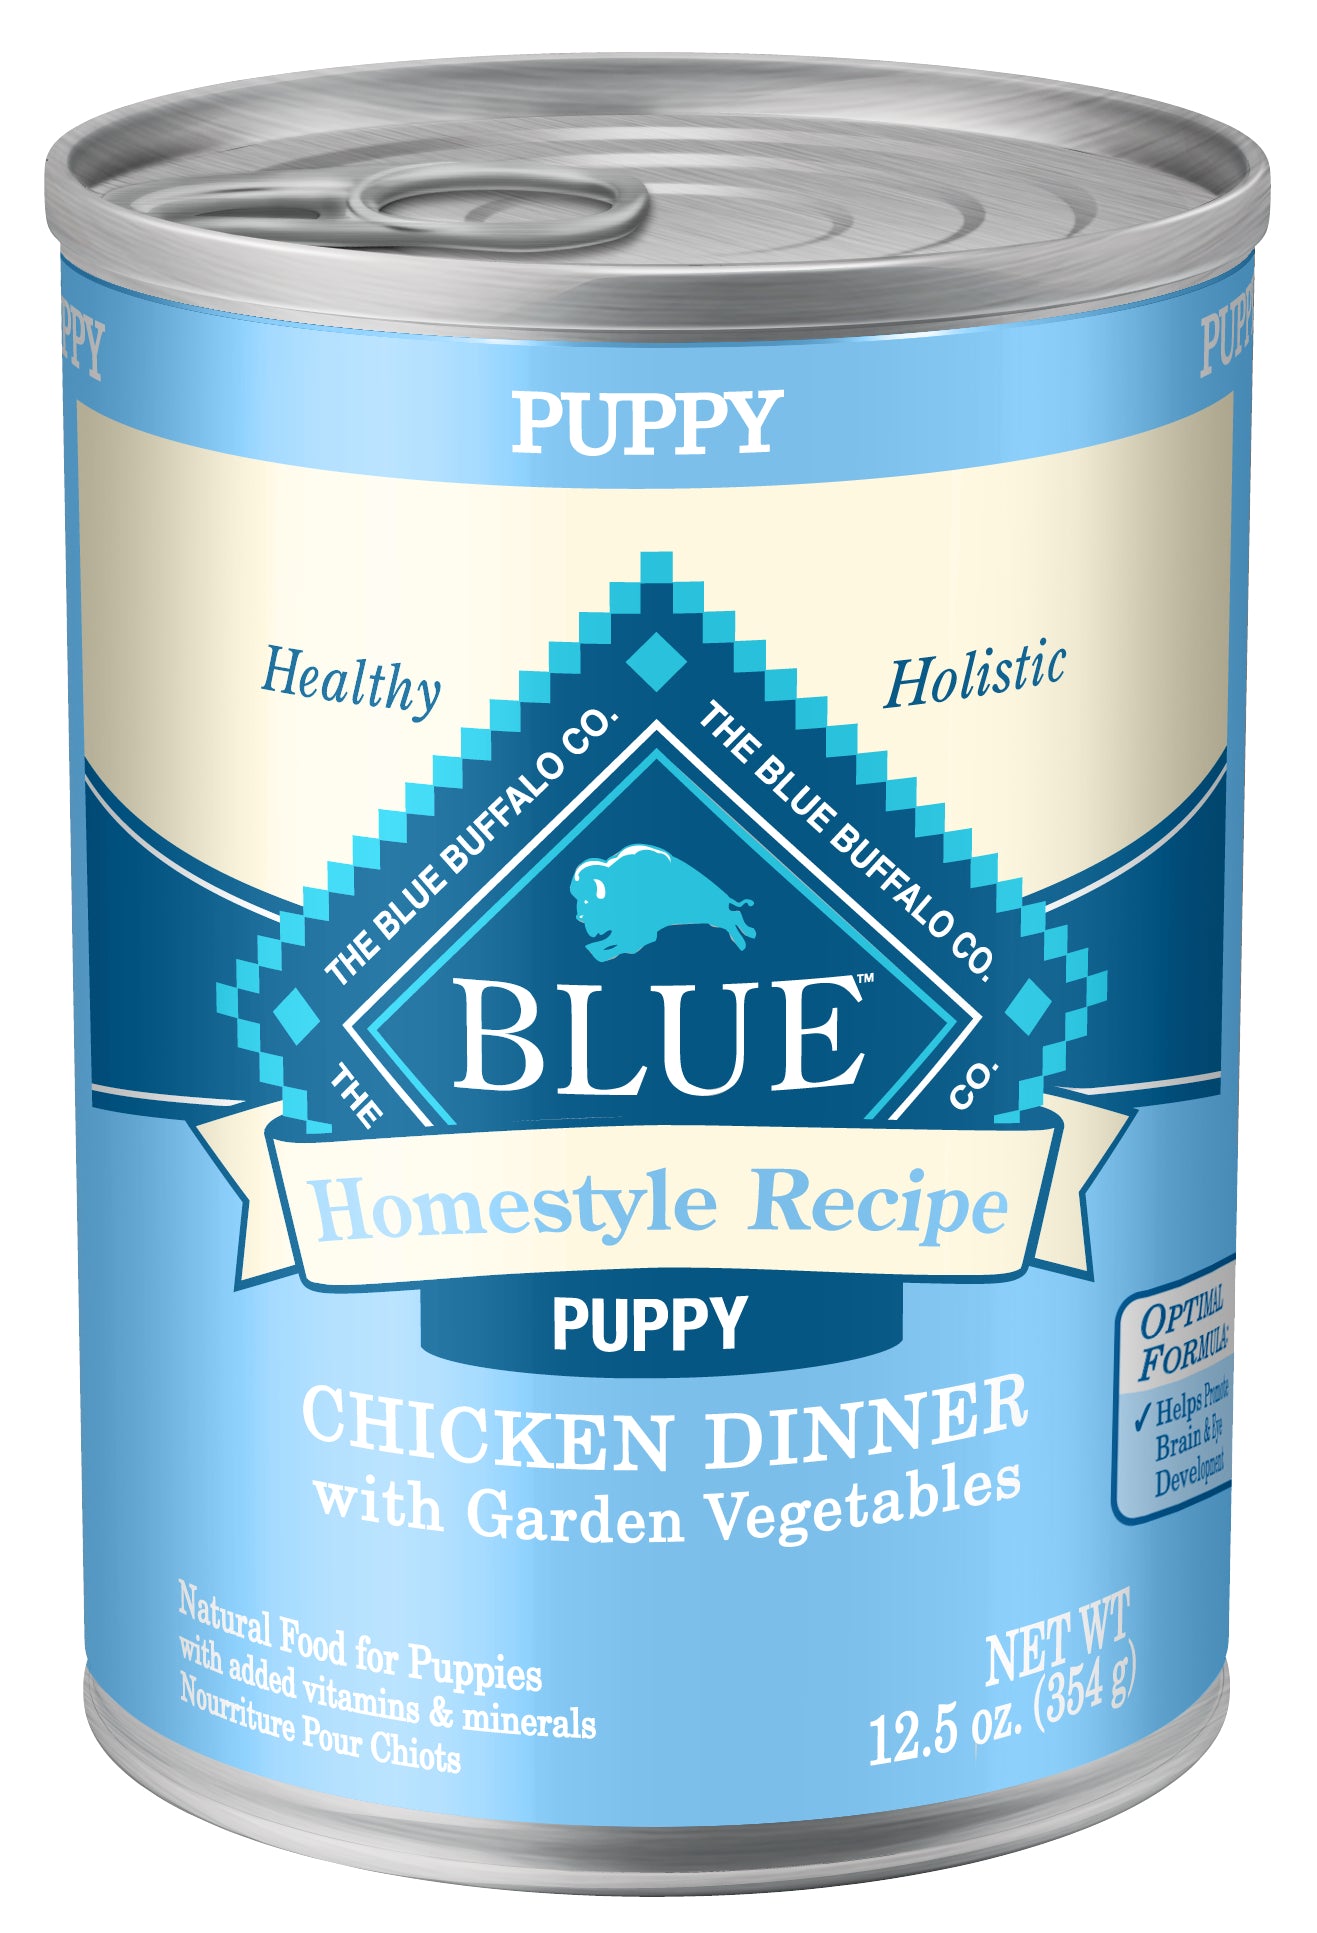 Blue Buffalo Homestyle Recipe Natural Puppy Wet Dog Food, Chicken 12.5-oz, Case of 12